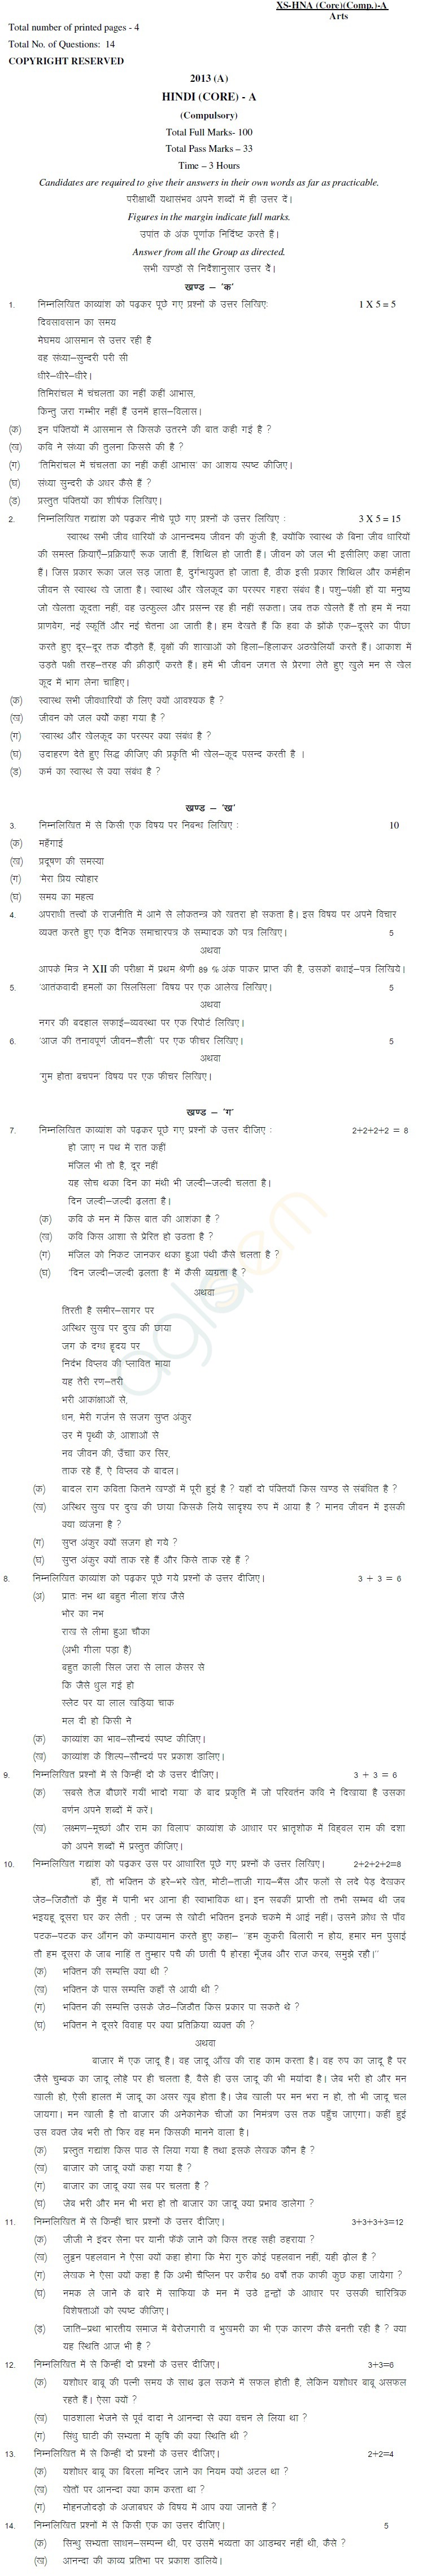 Jharkhand Board Class XII Sample Papers – HINDI CORE